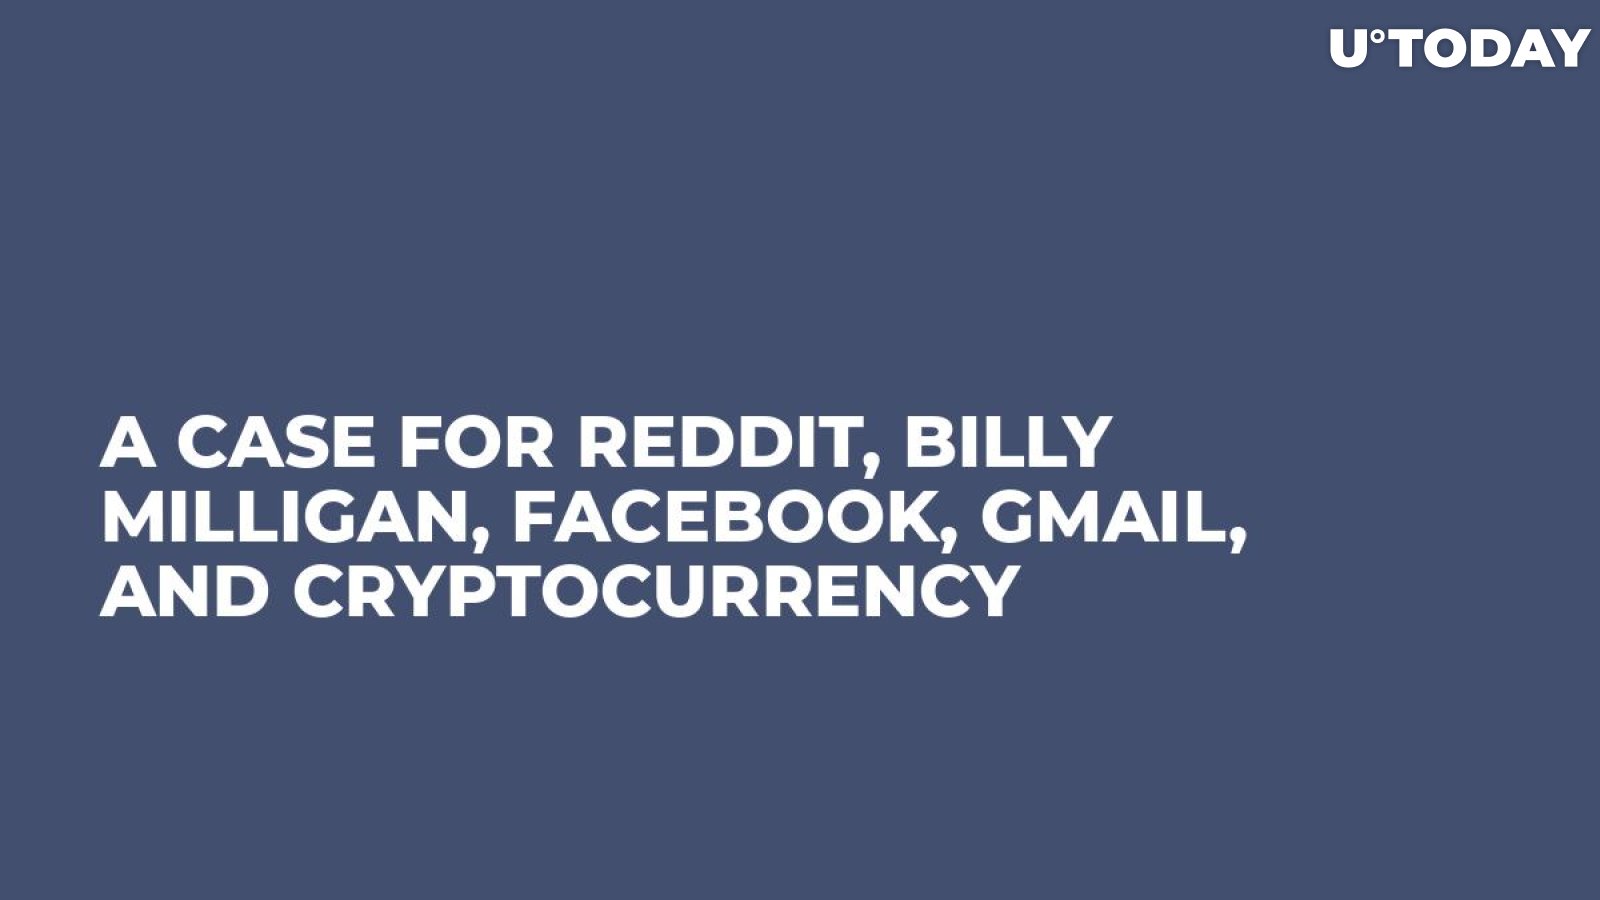 A Case for Reddit, Billy Milligan, Facebook, Gmail, and Cryptocurrency